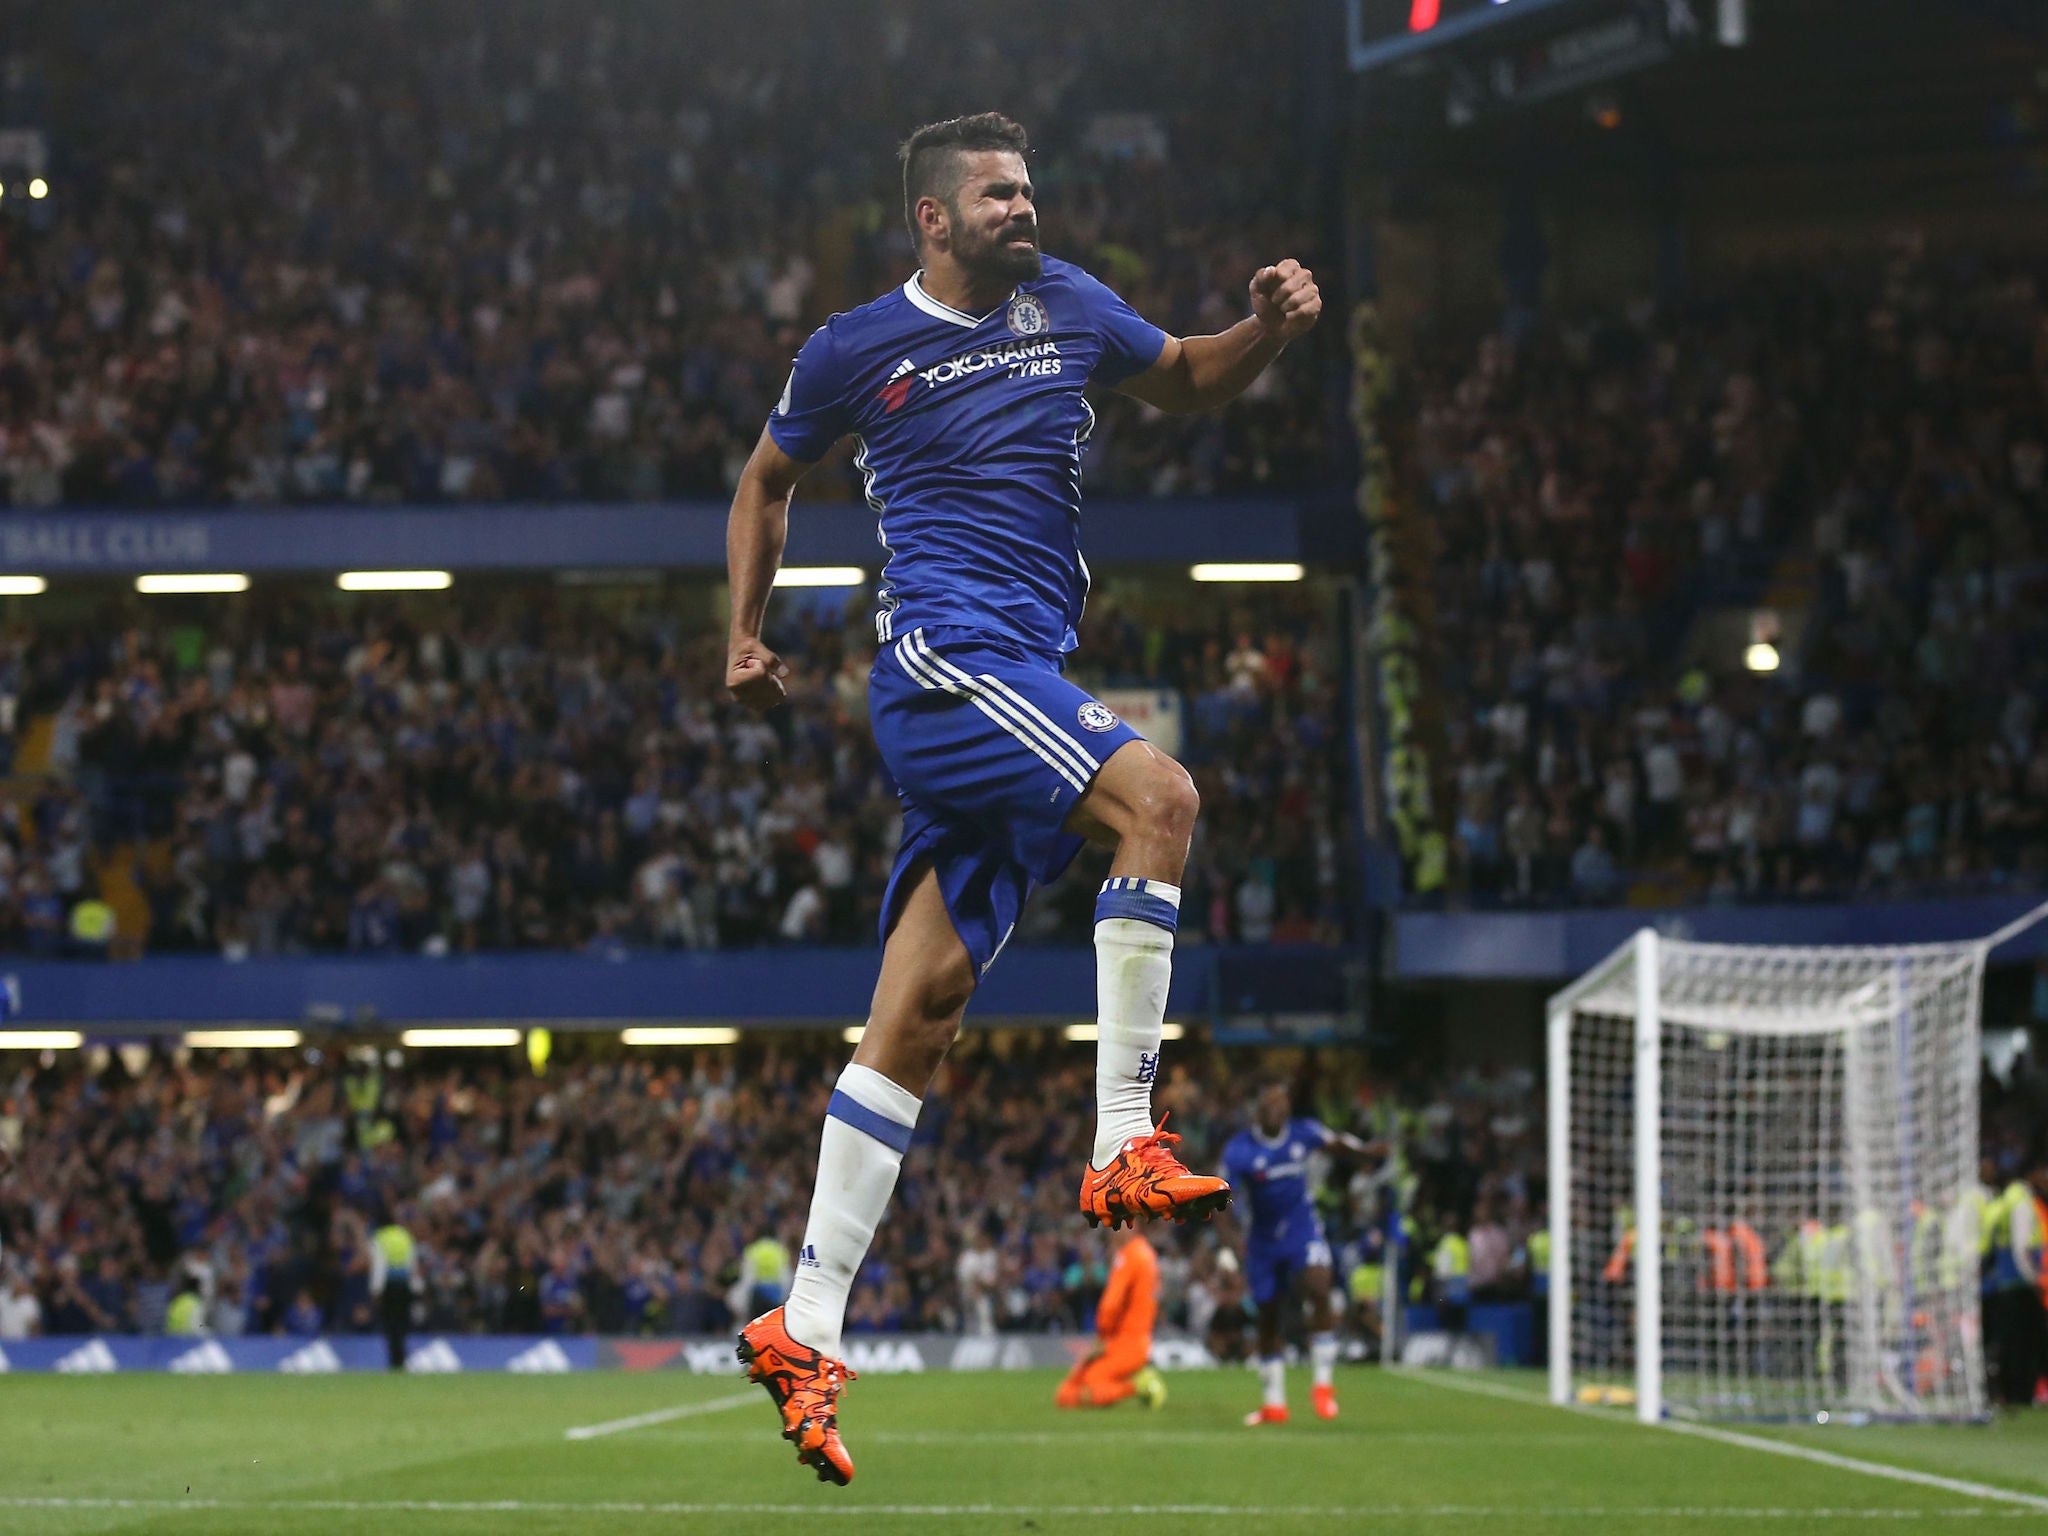 Diego Costa struck late for Chelsea against West Ham